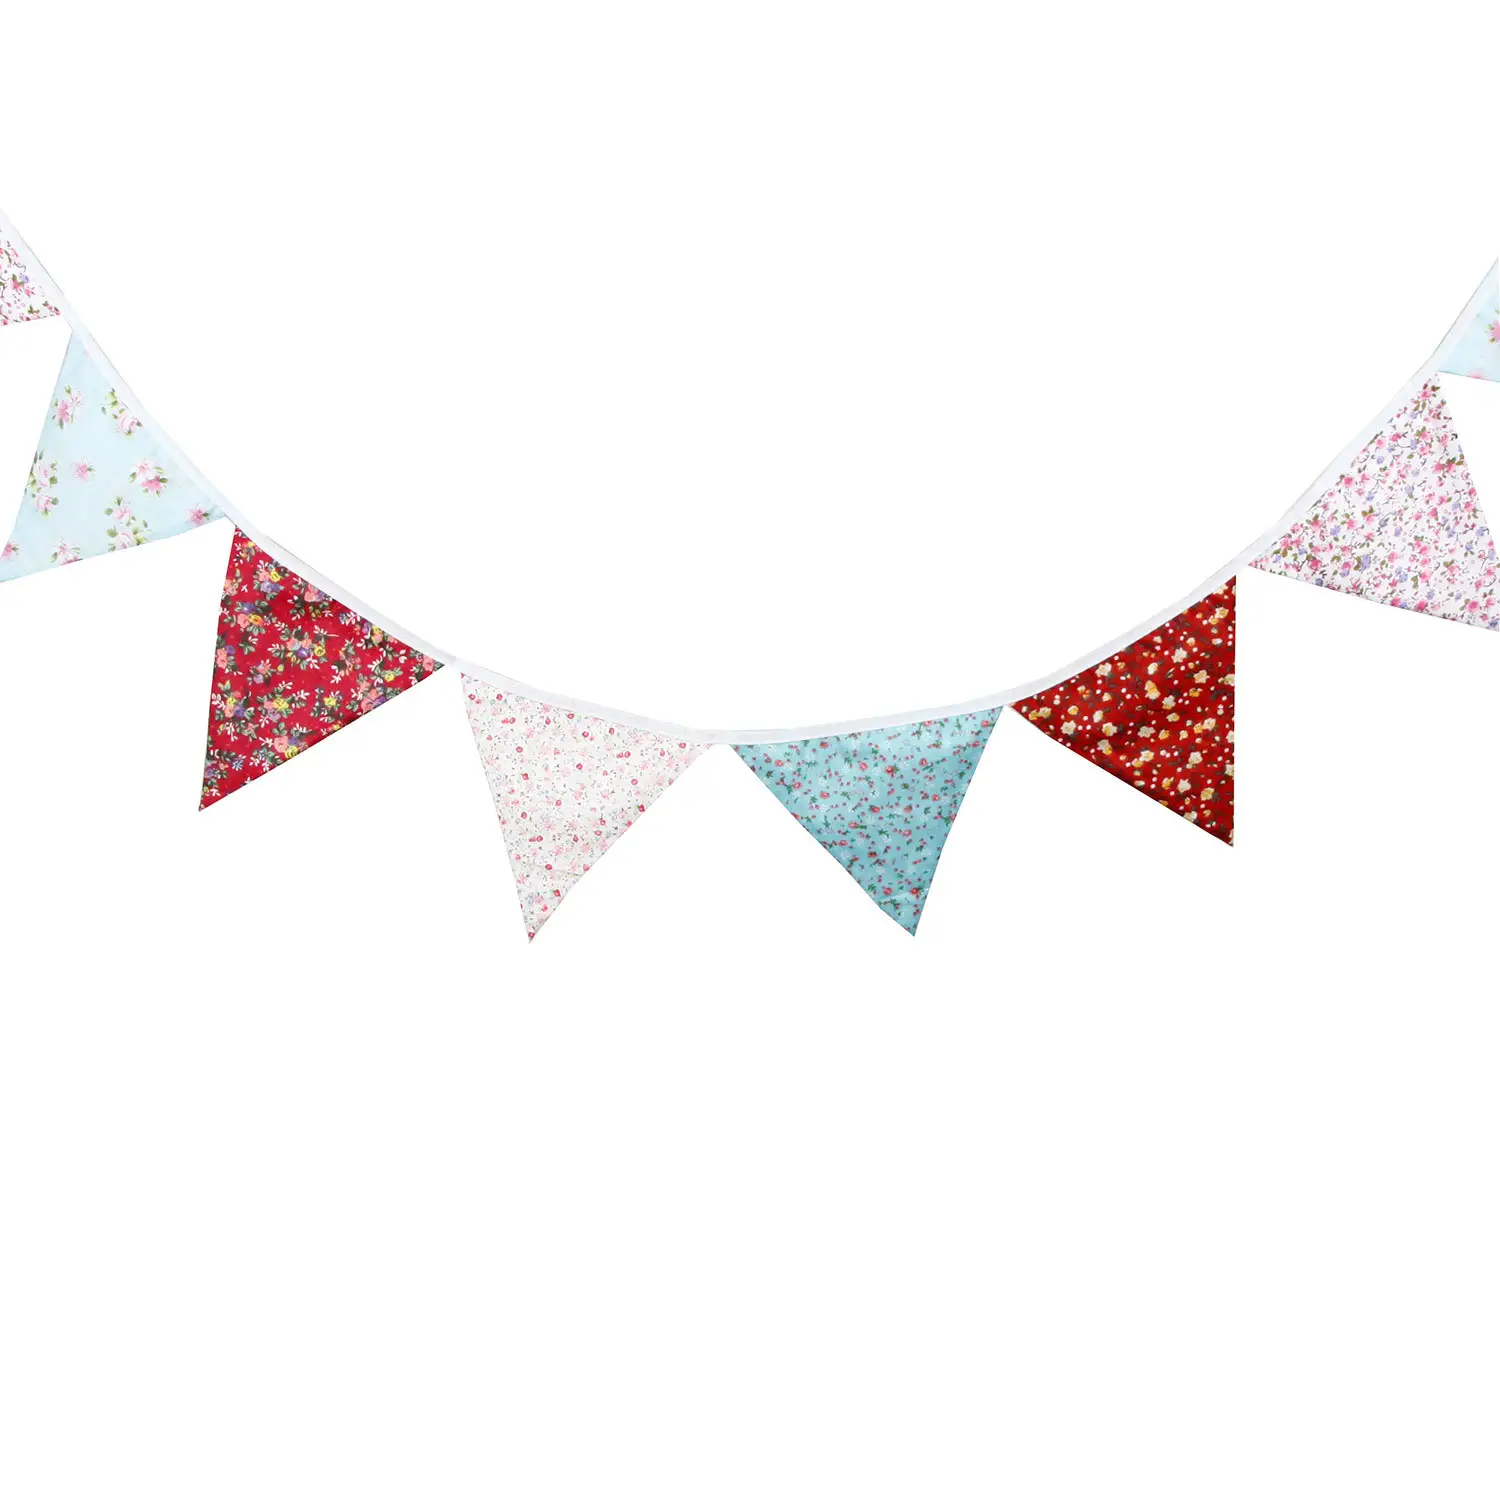 nuoshen 3.2M Multicolor Triangle Flags Pennant Bunting Garlands Triangle Flag Bunting Banner for Wedding Birthday Parties Pink Blue 